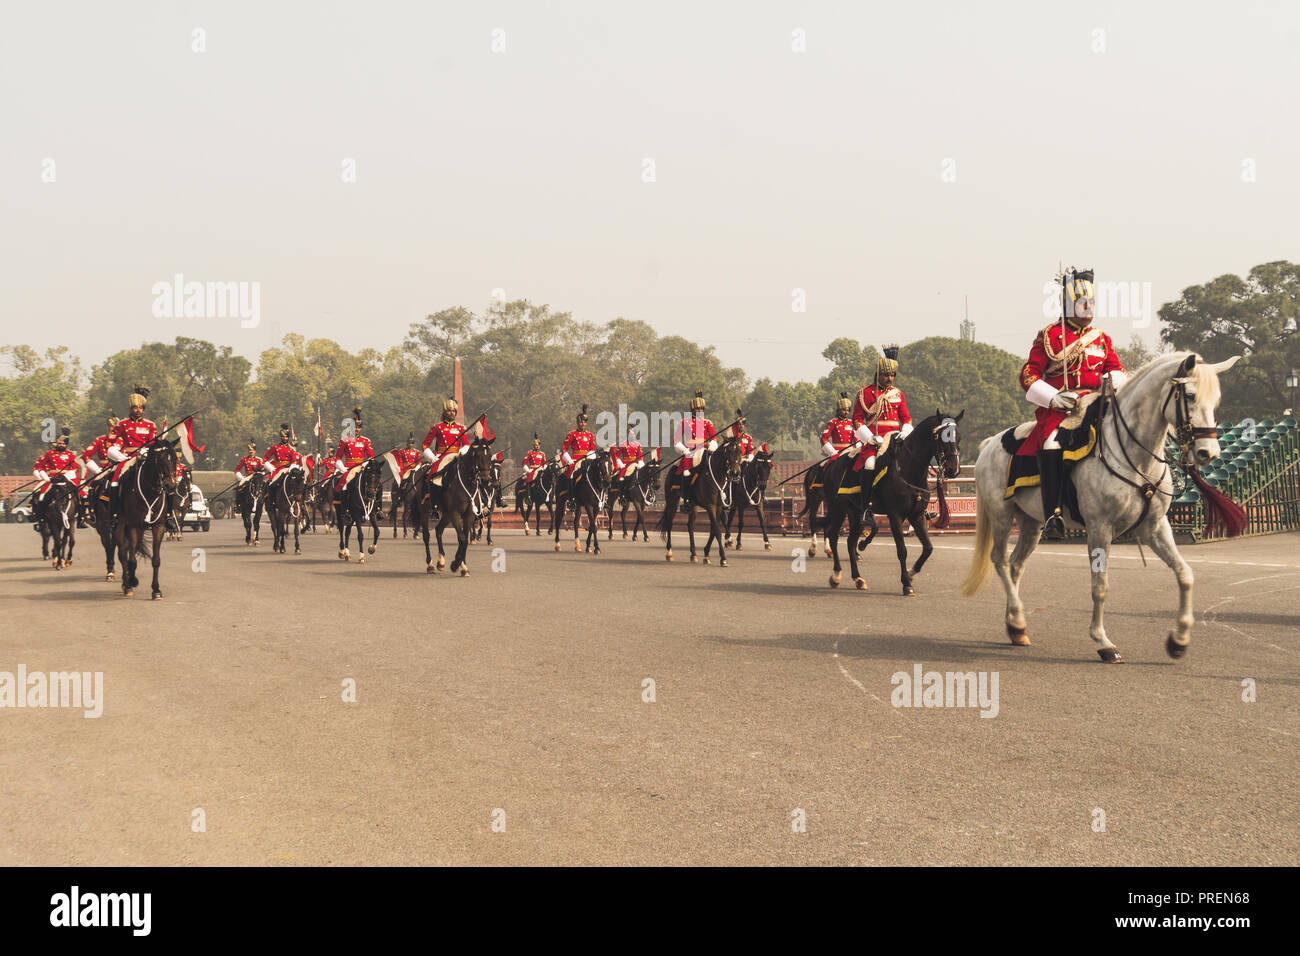 Soldiers practice for the Republic day parade on horses in New Delhi, India. January 26, 2018 in Delhi, India Stock Photo